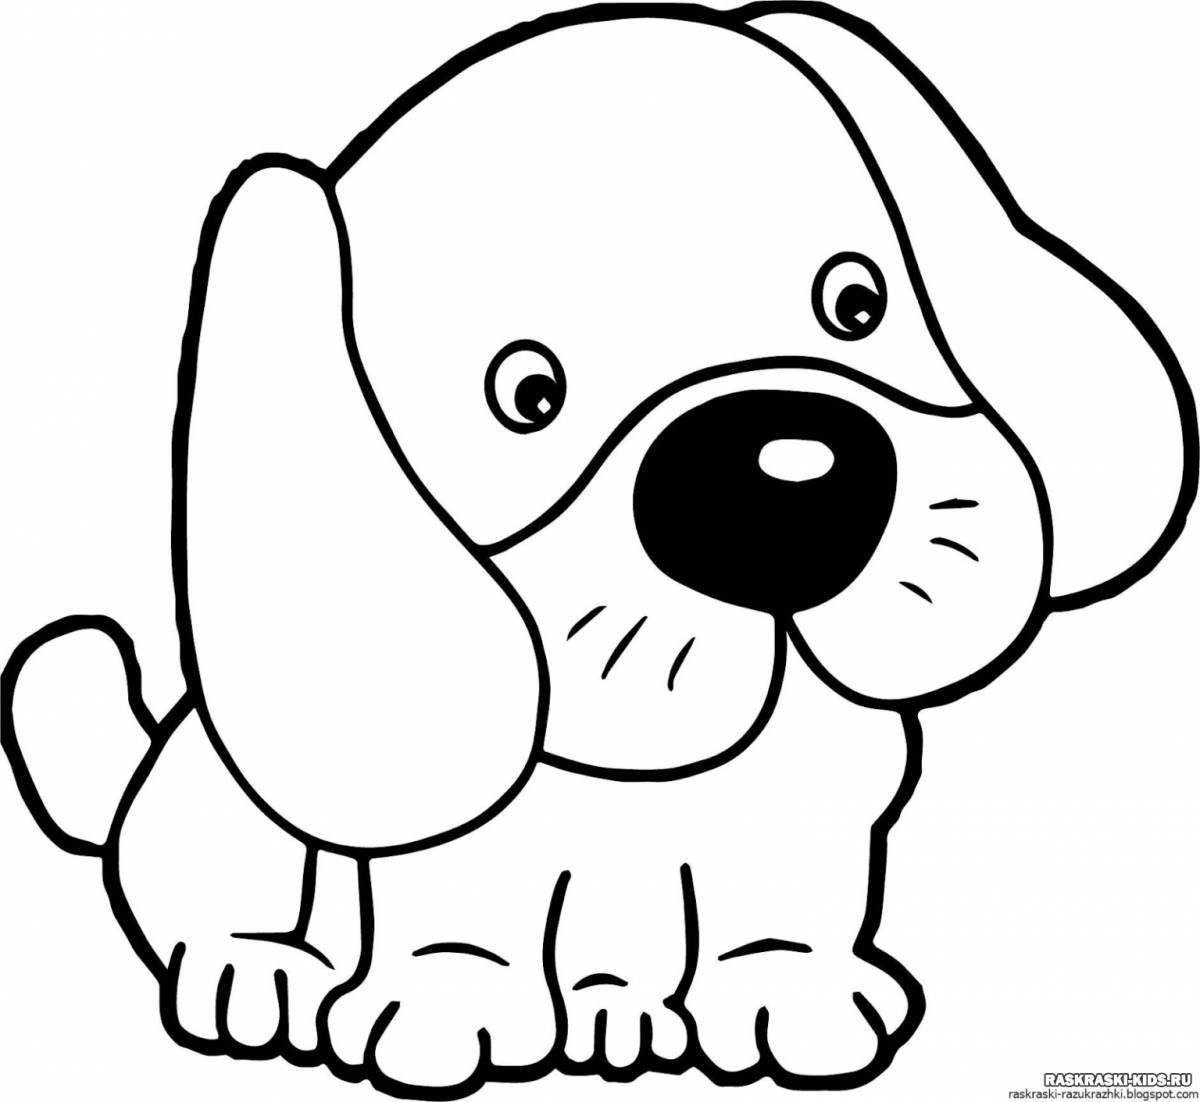 Animated coloring pages with dogs and animals